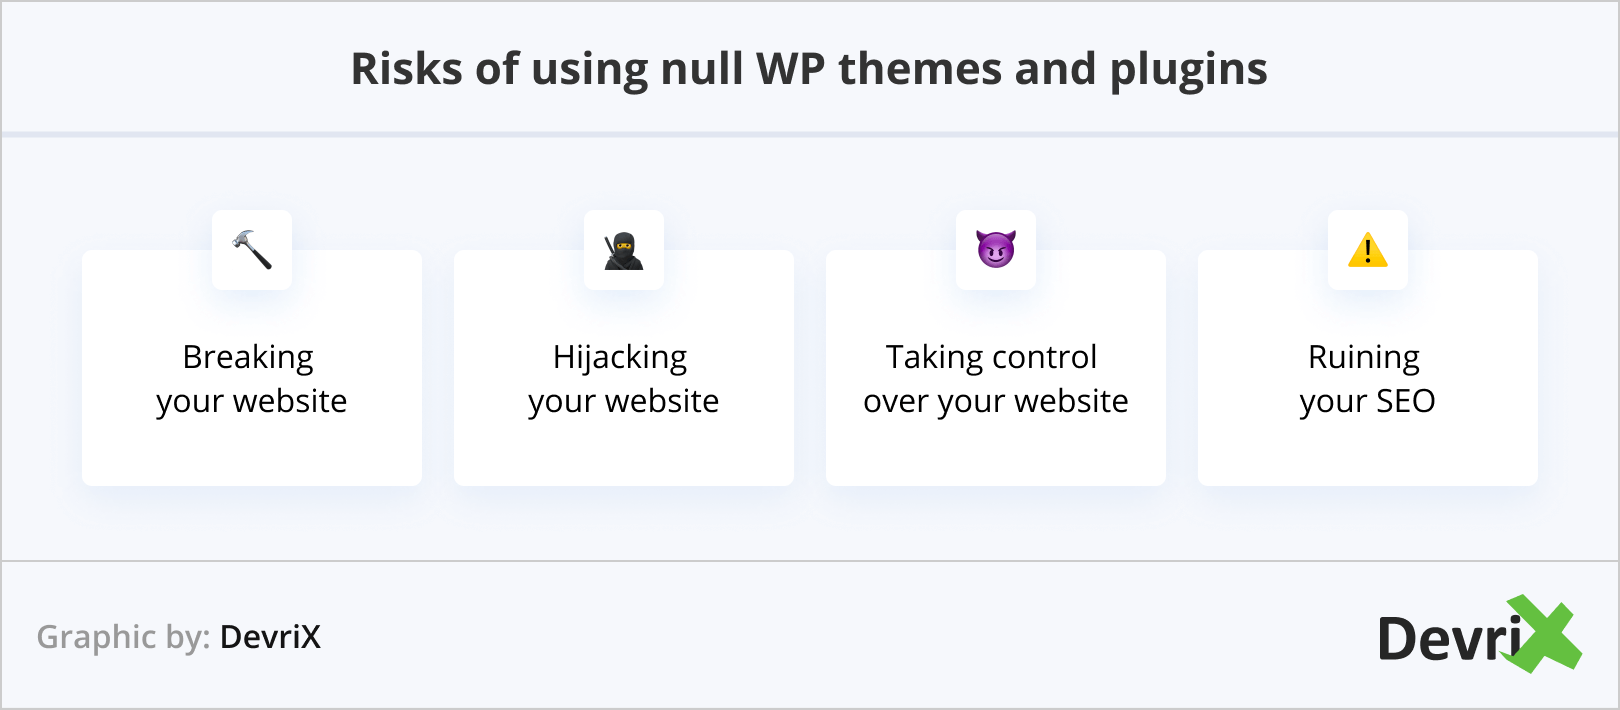 Risks of using null WP themes and plugins